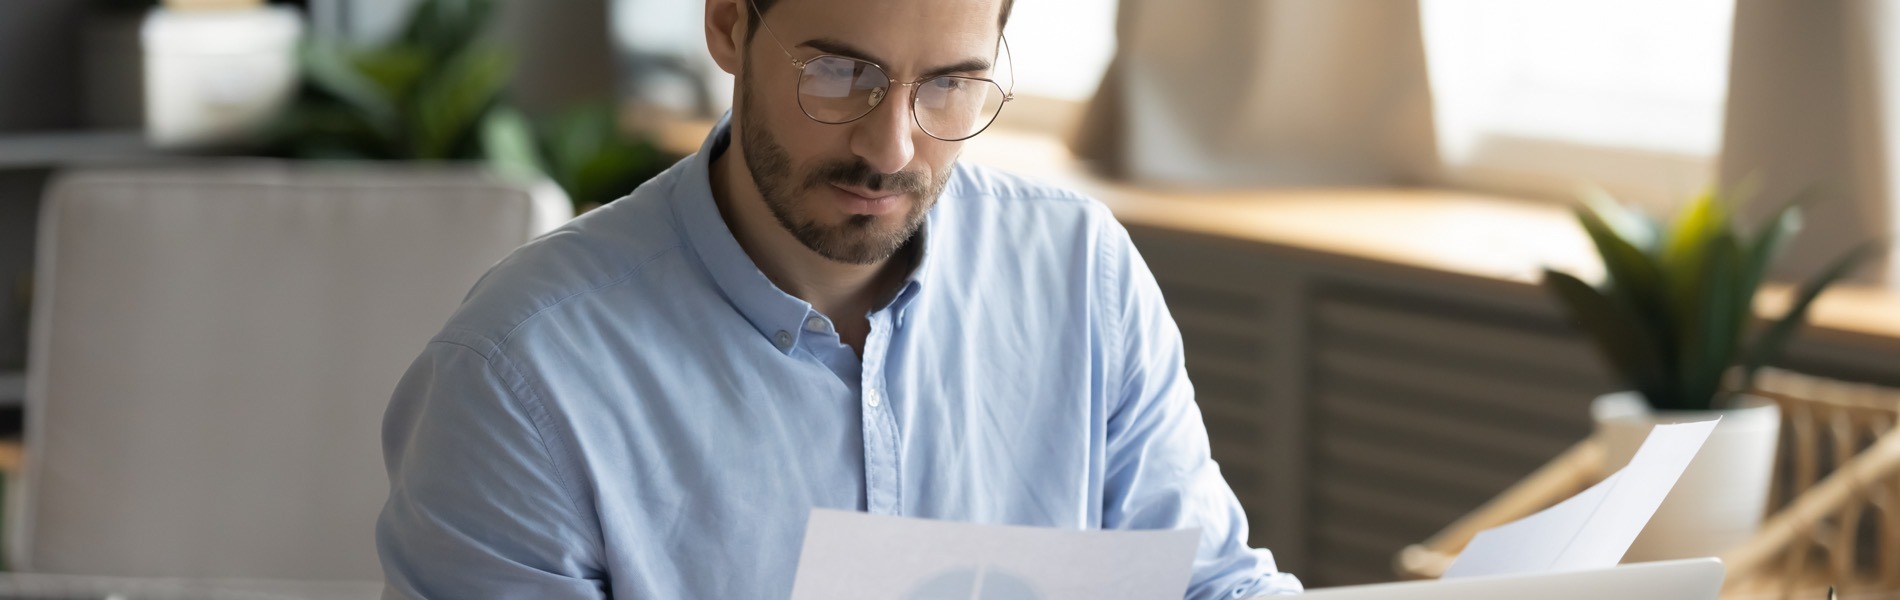 man studying commercial bill